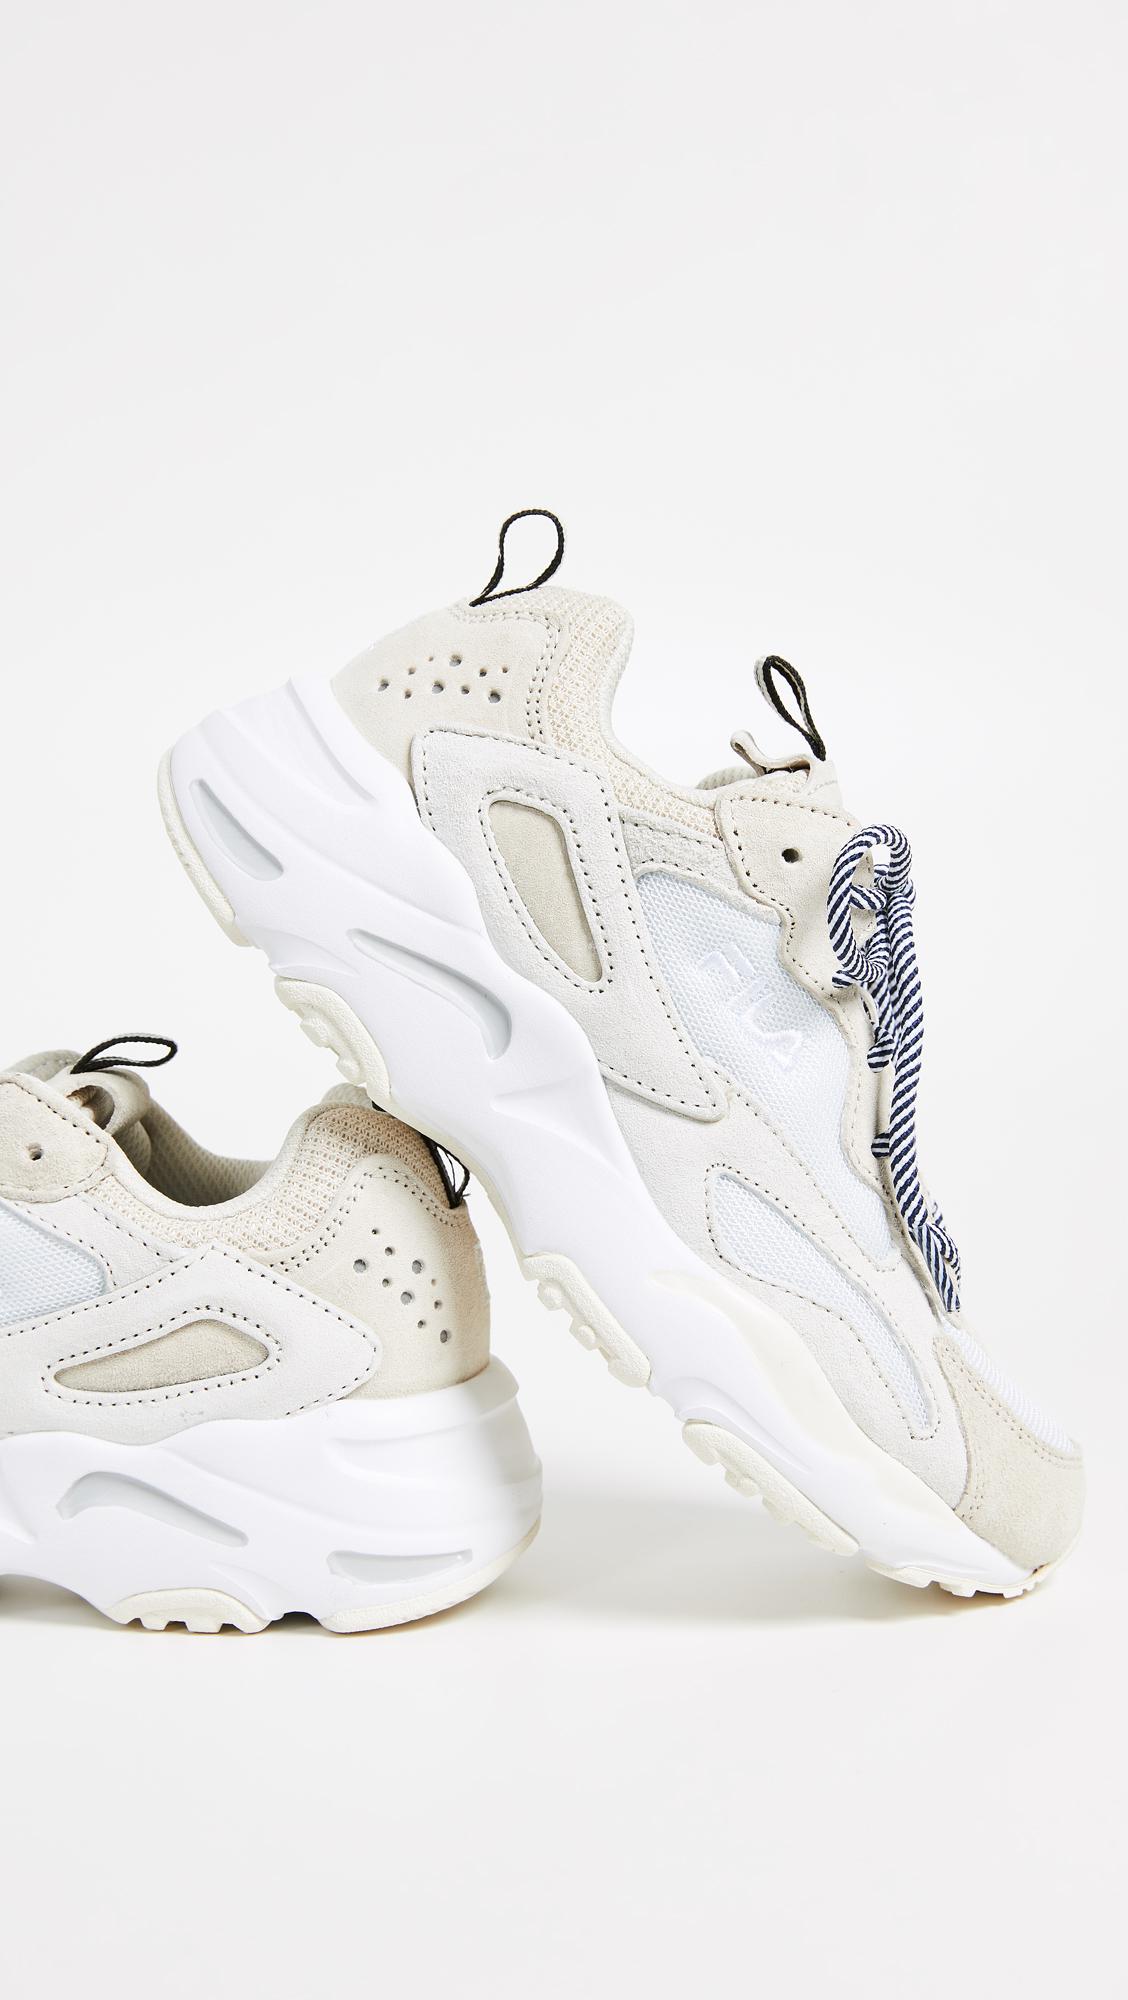 Fila Suede Ray Tracer Sneakers in White - Lyst